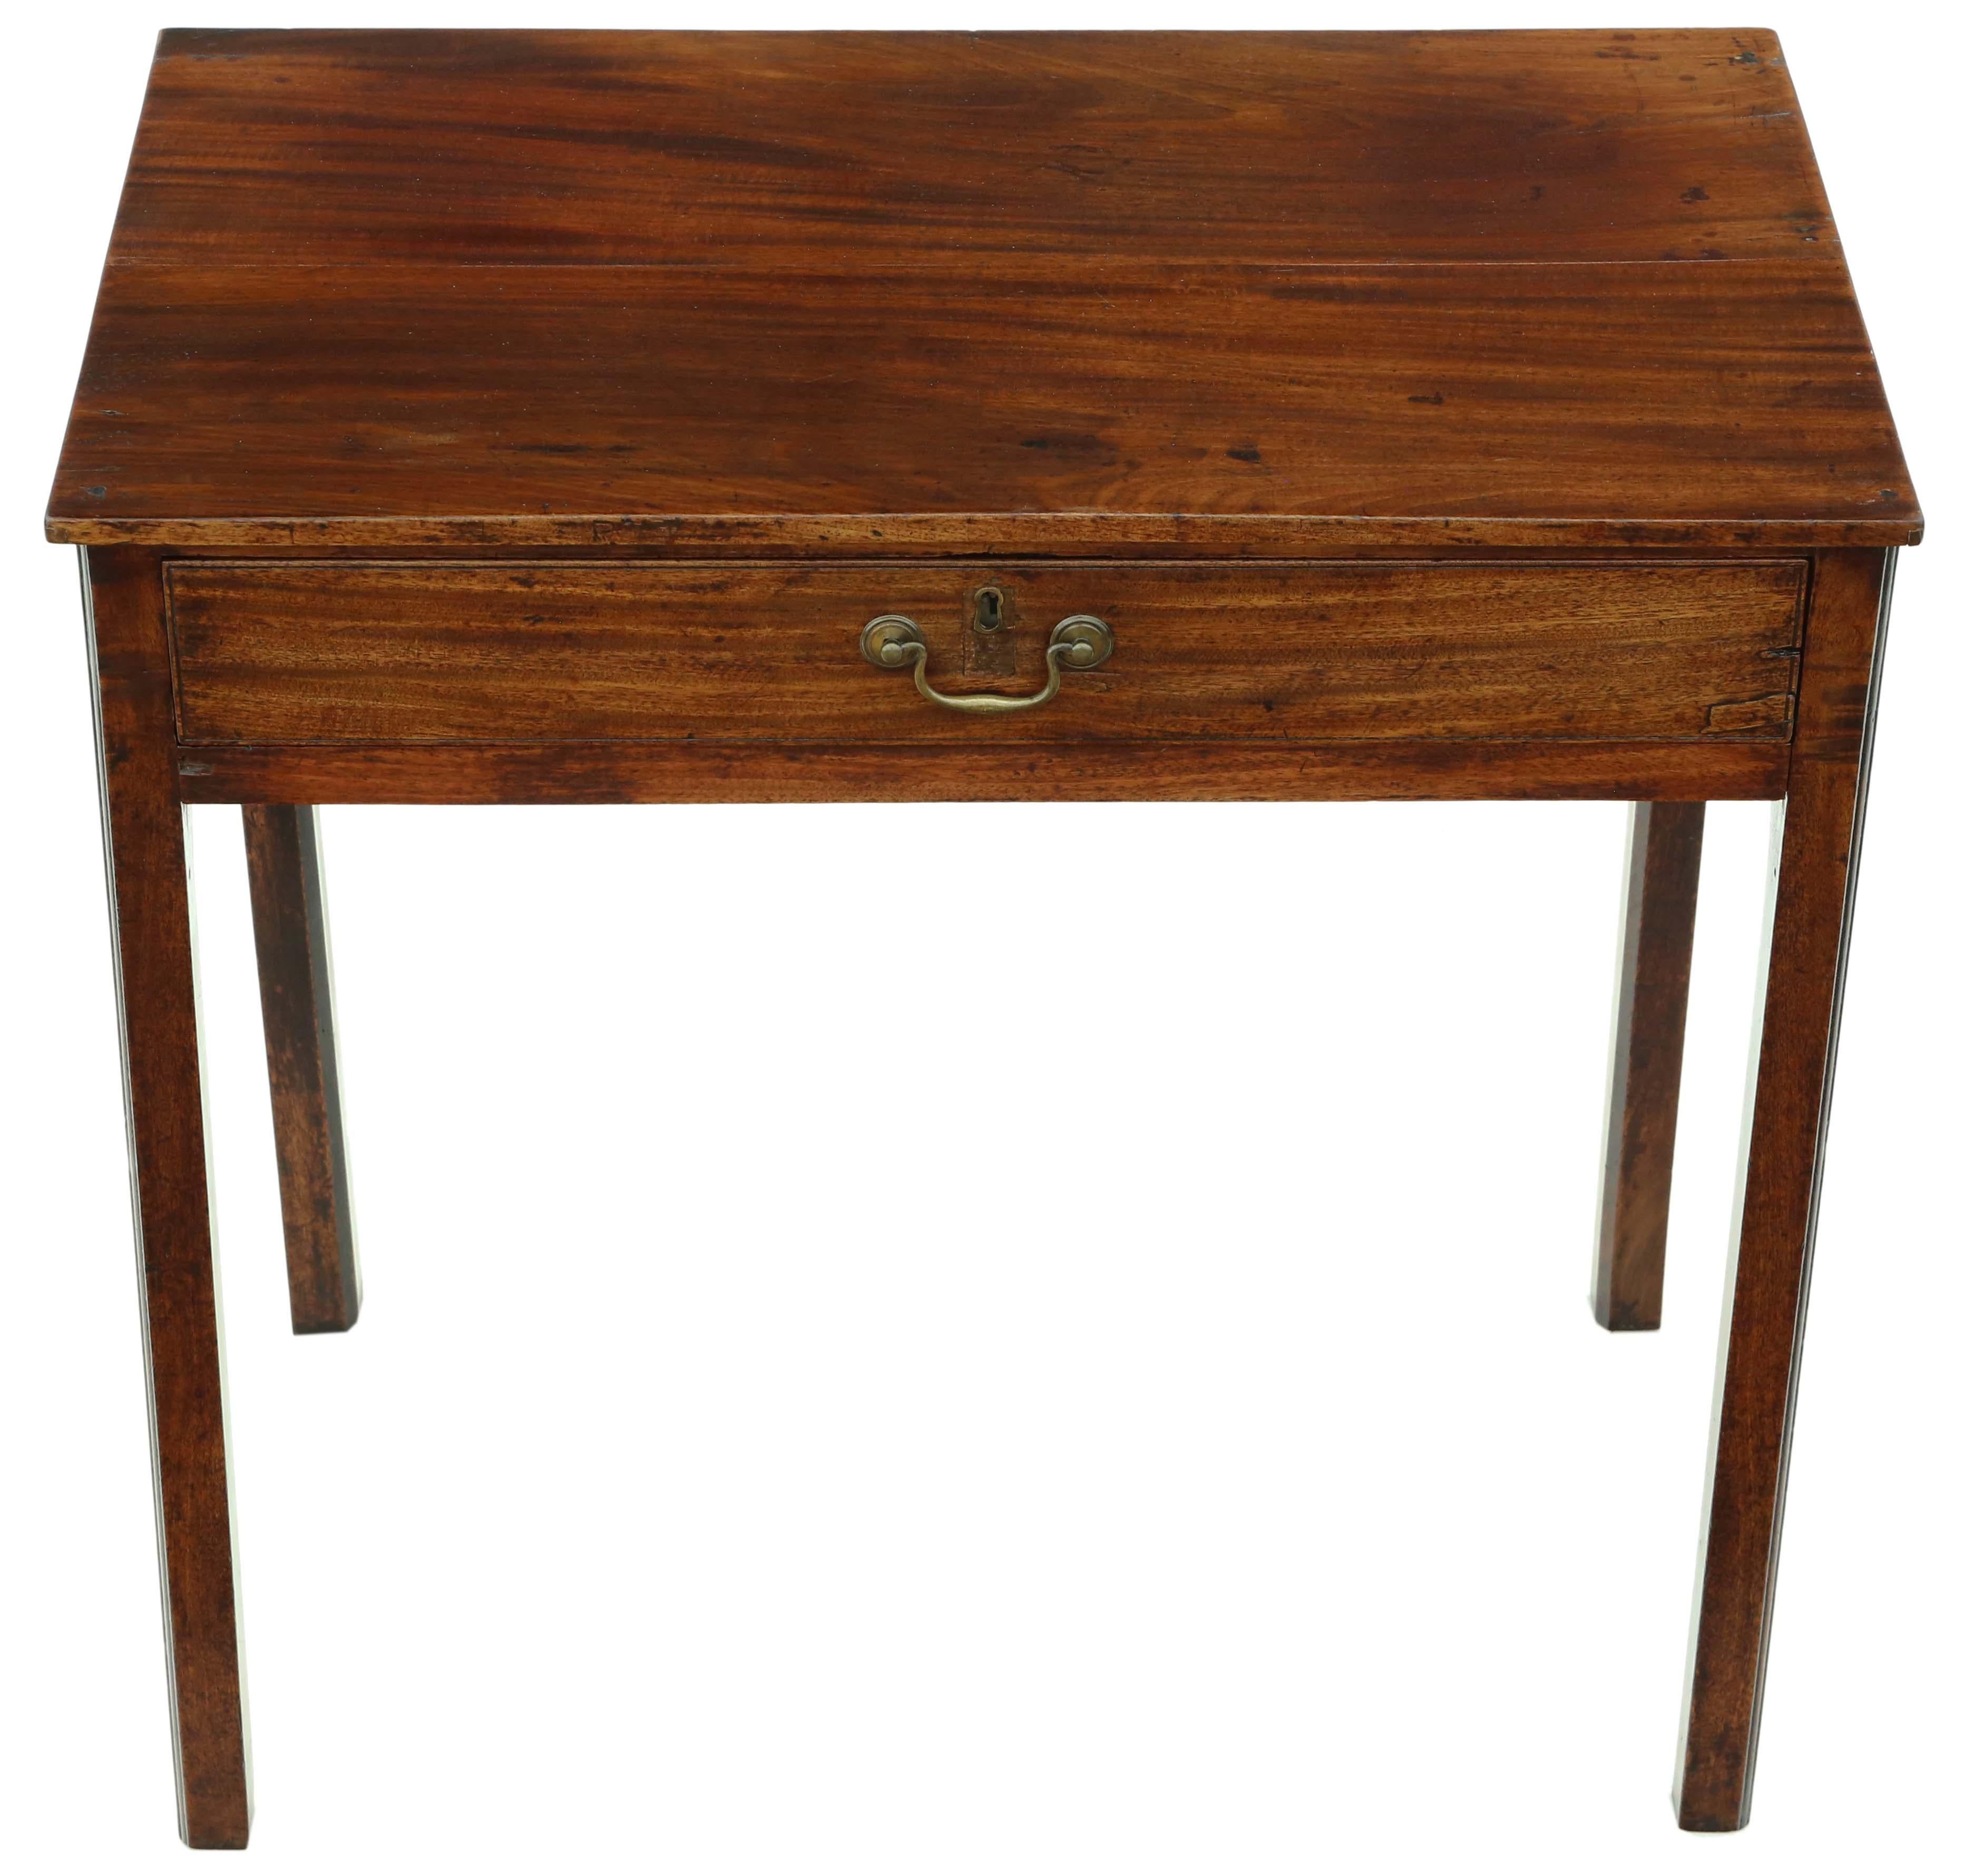 Antique quality late 18th Century mahogany writing side dressing table desk. Lovely age colour and patina.

No loose joints. Full of age, character and charm.

Would look great in the right location! A charming, elegant piece.

Overall maximum